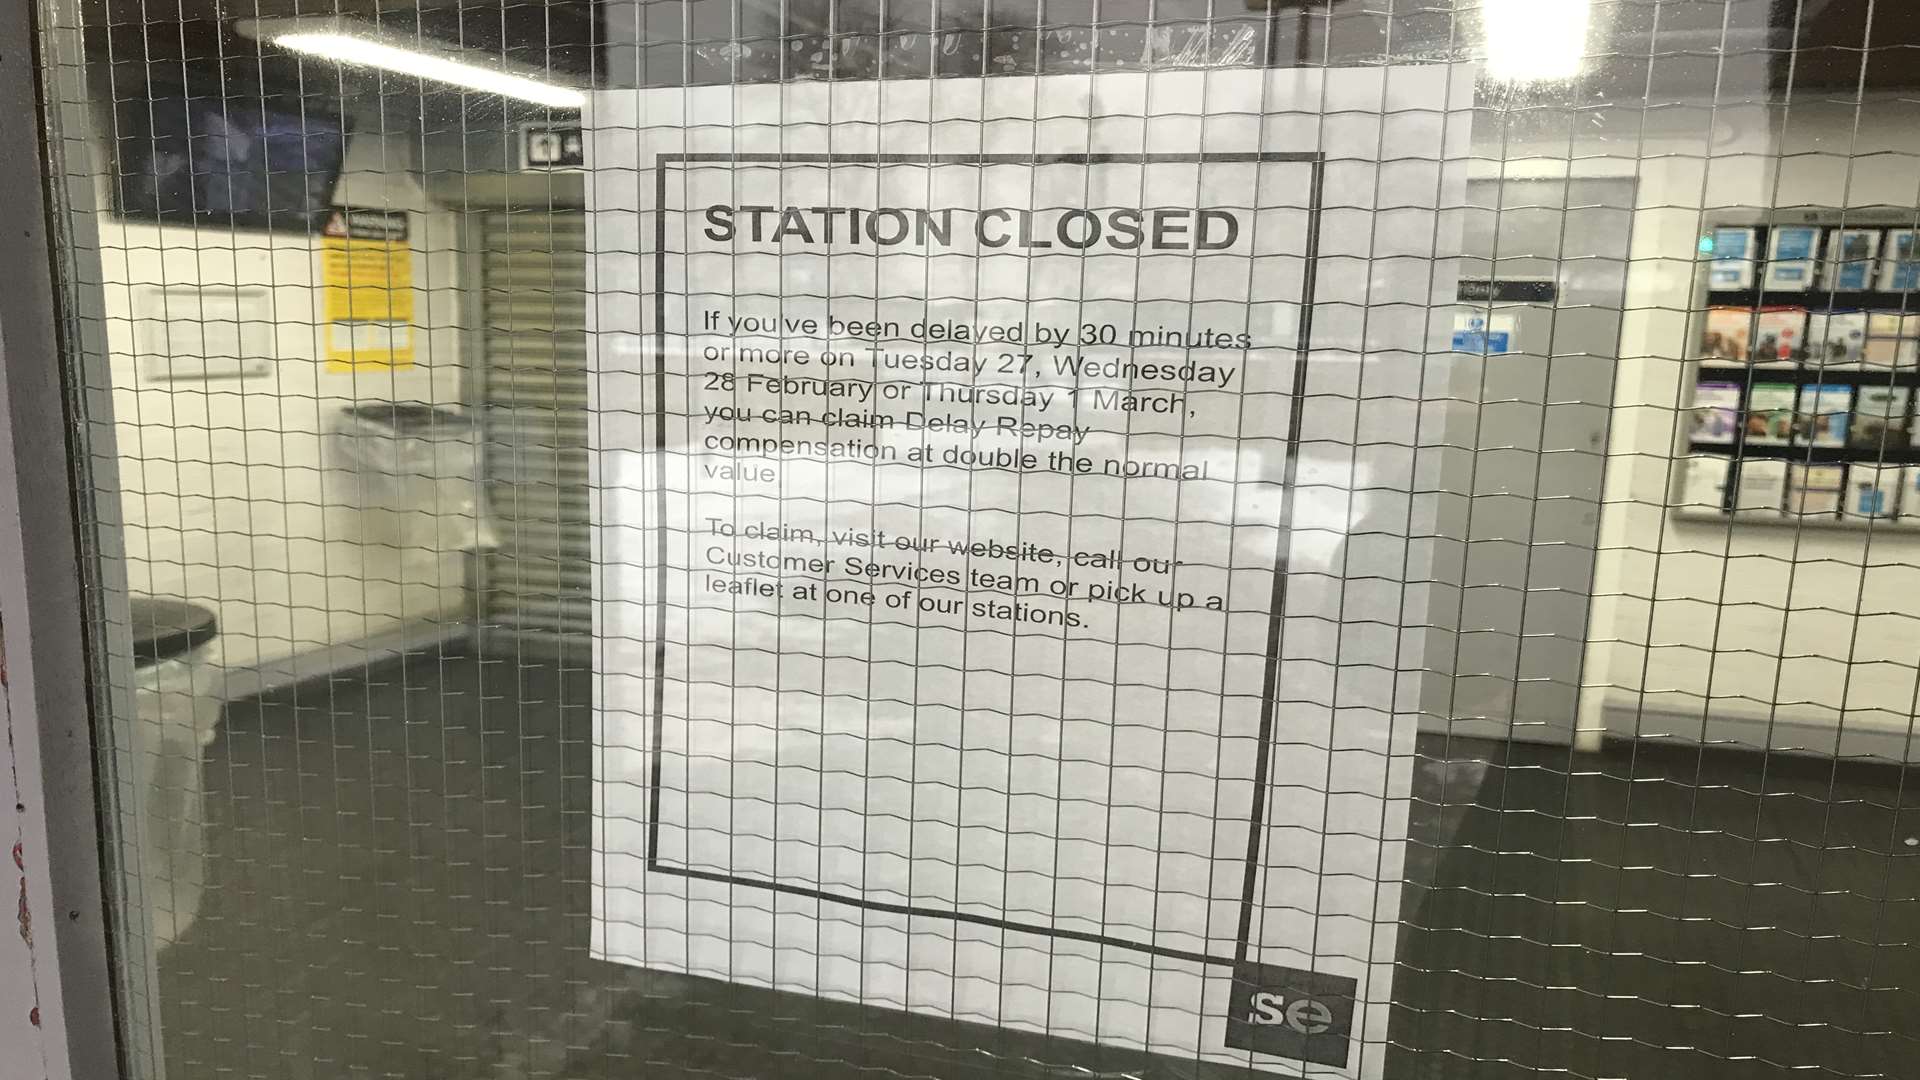 Customers arrived to find the closure posted on the station door.